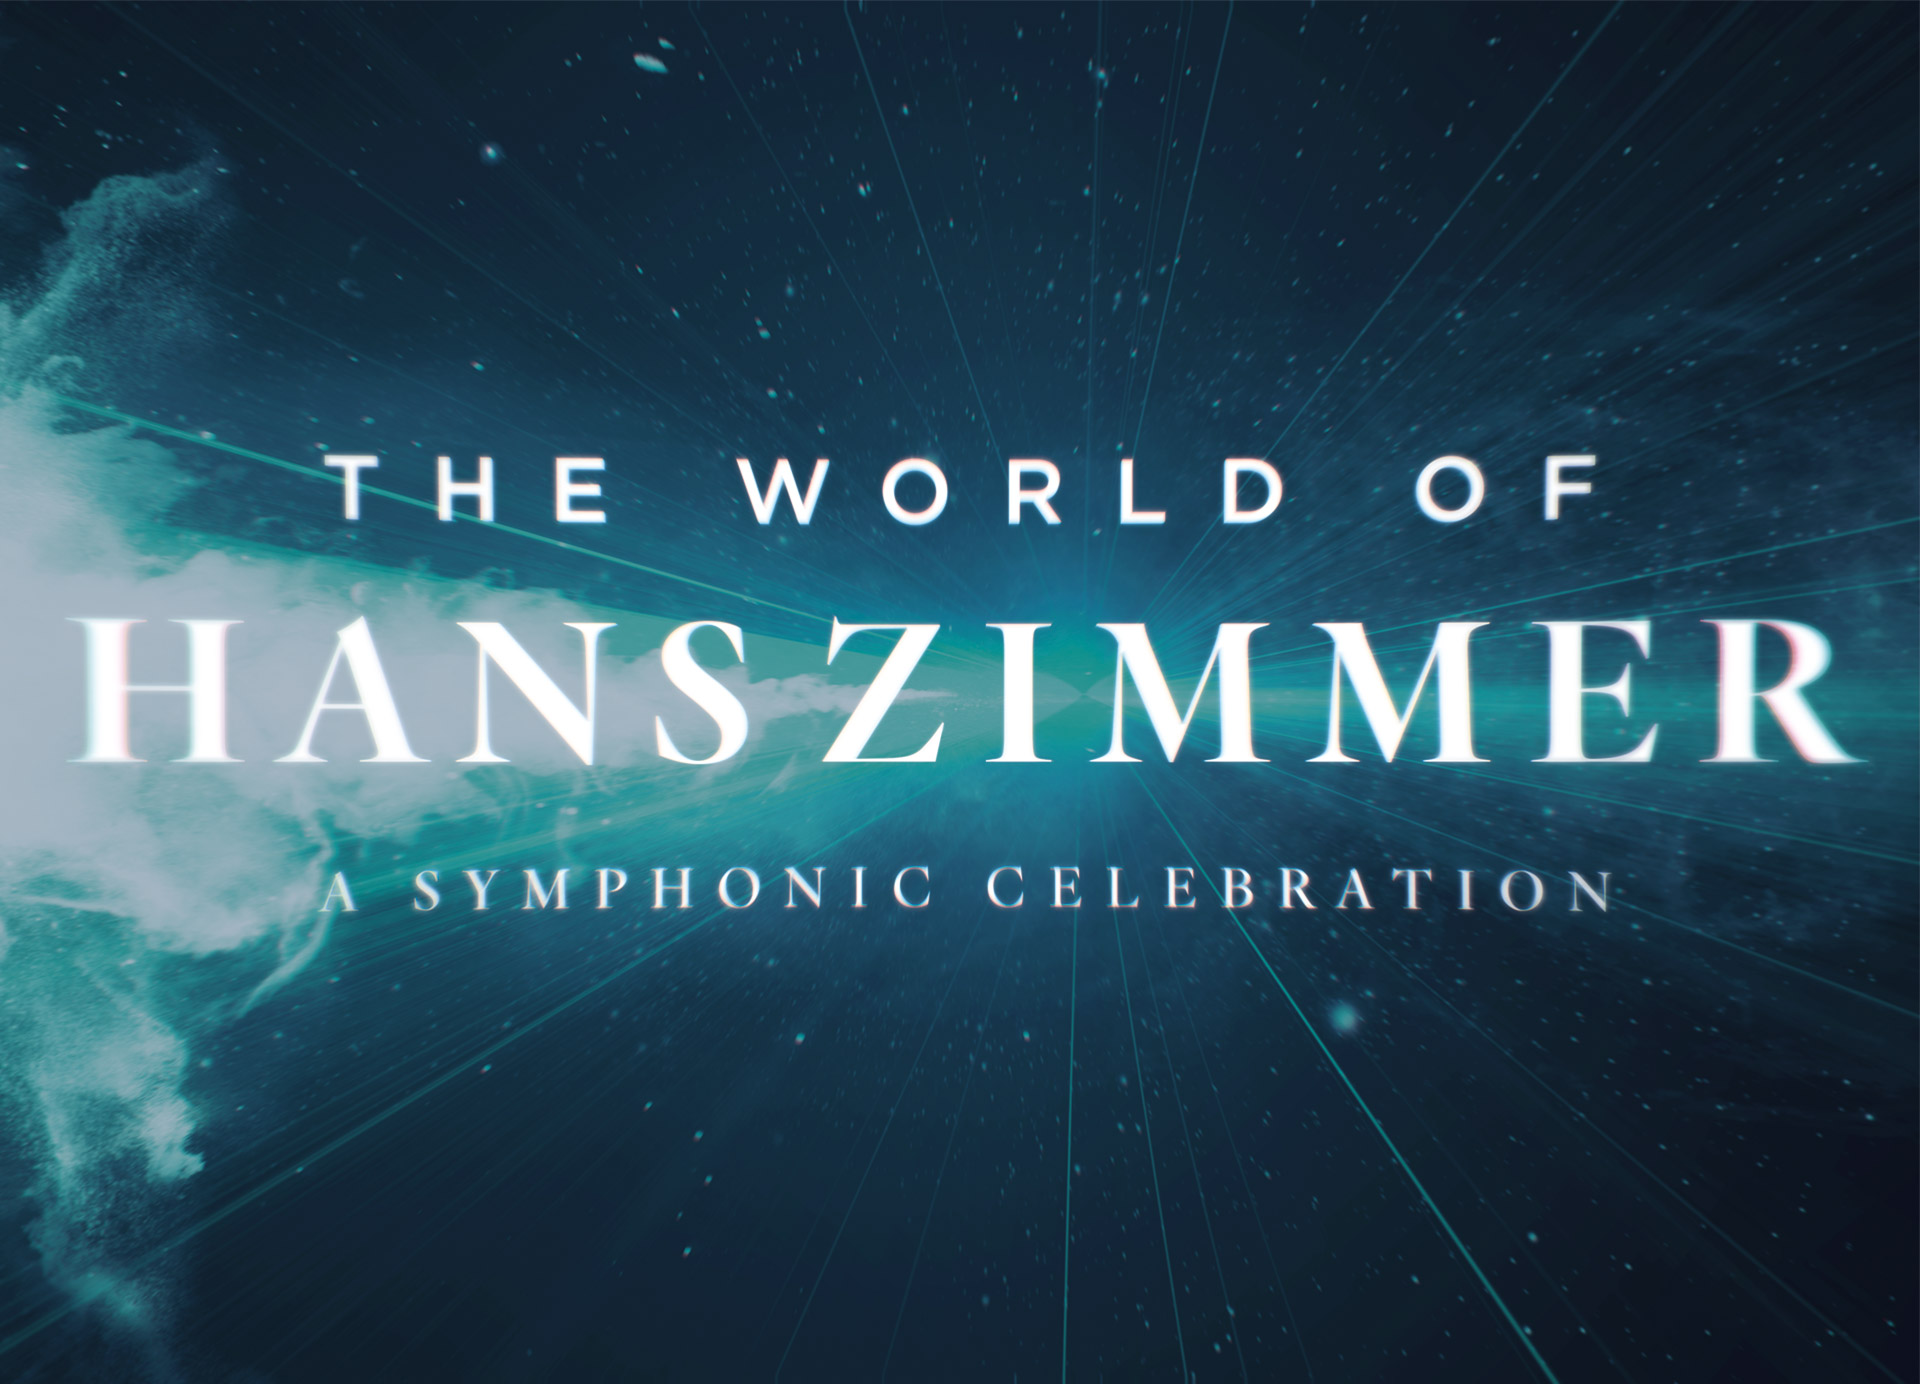  Our thoughts on The World of Hans Zimmer